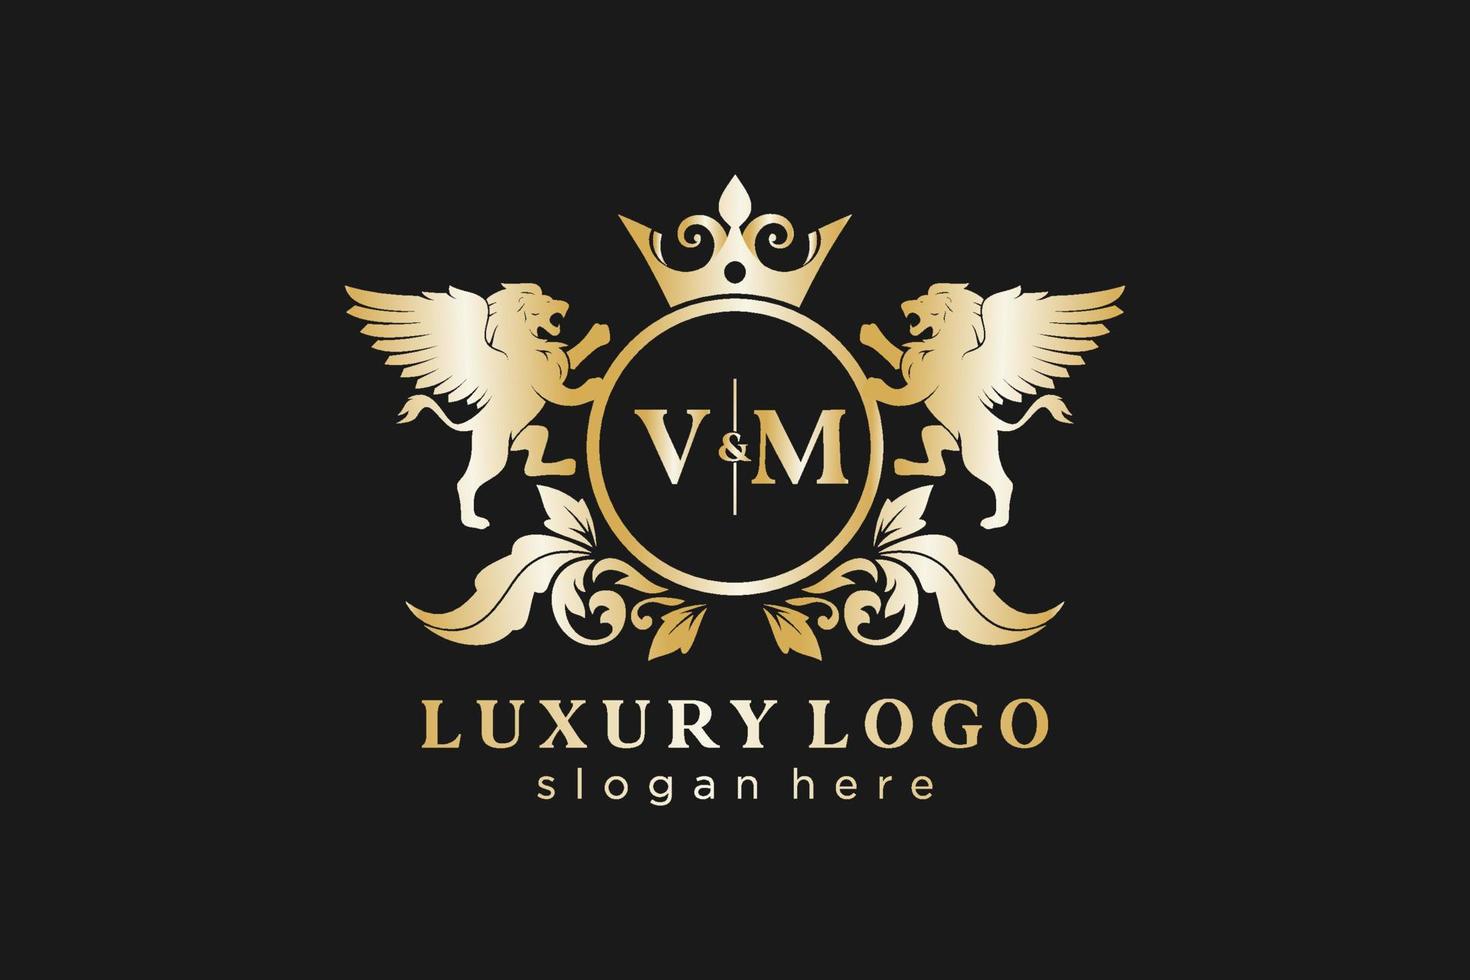 Initial VM Letter Lion Royal Luxury Logo template in vector art for Restaurant, Royalty, Boutique, Cafe, Hotel, Heraldic, Jewelry, Fashion and other vector illustration.